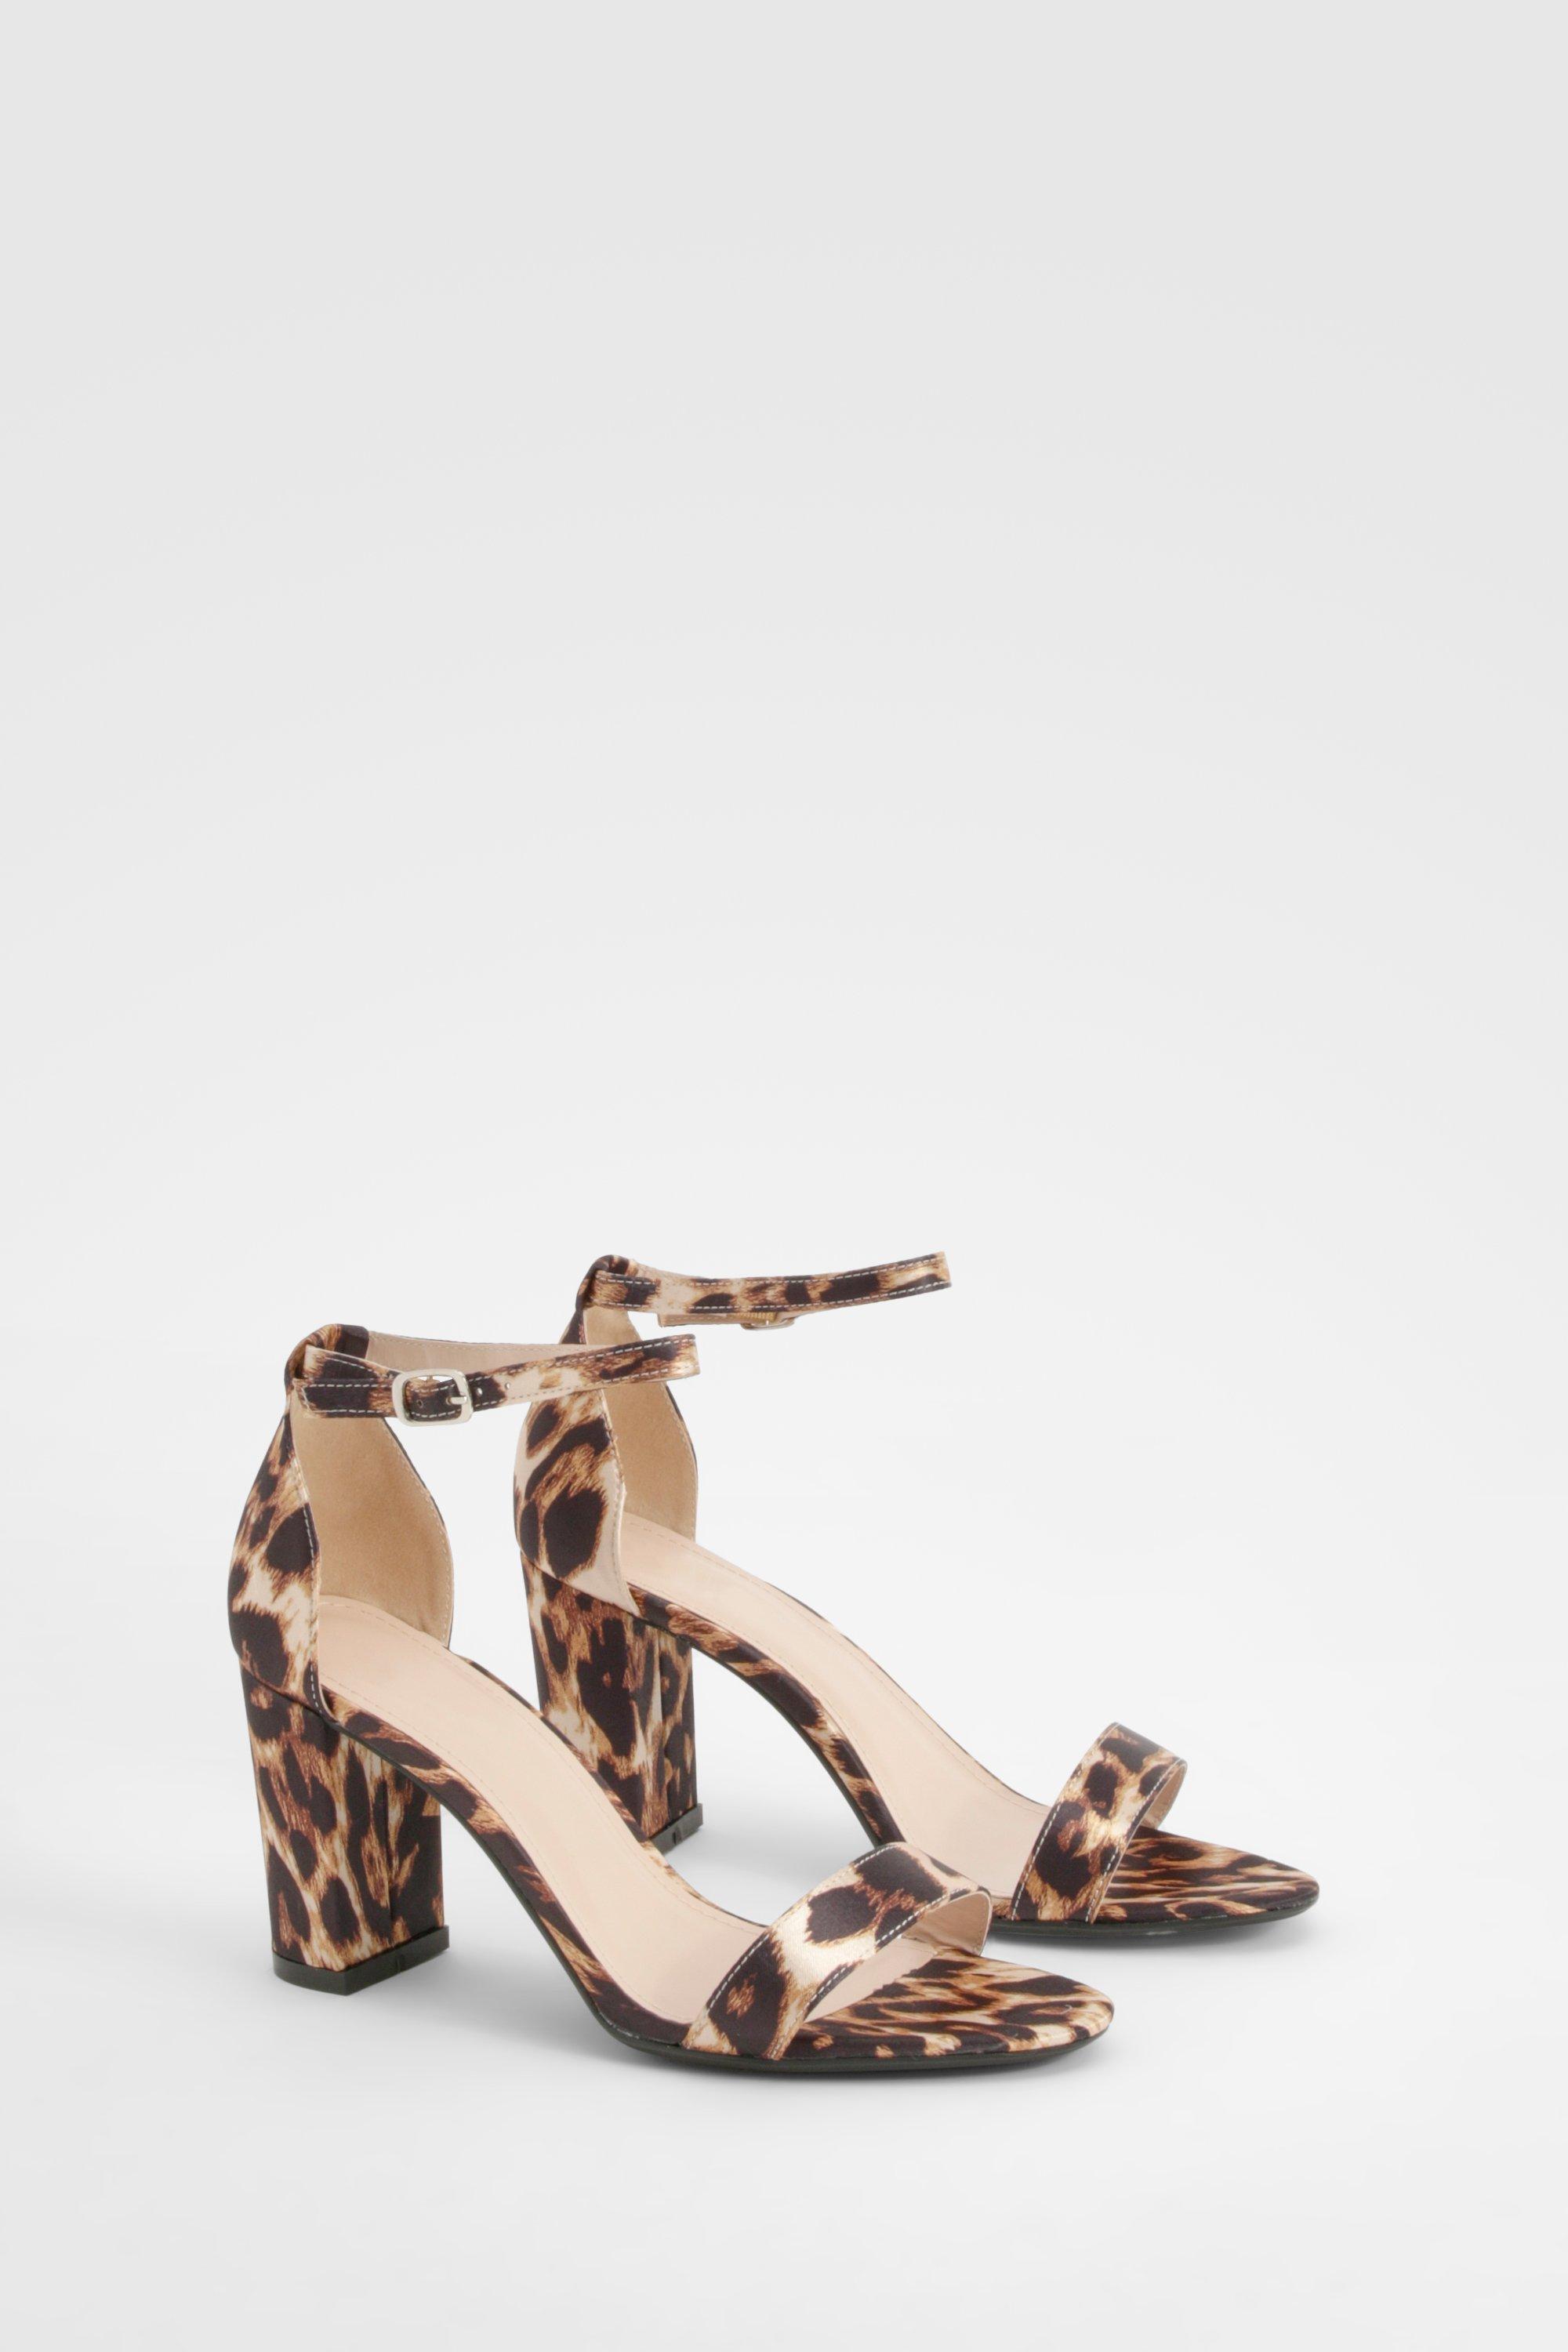 Image of Leopard Mid Block Barely There Heels, Multi